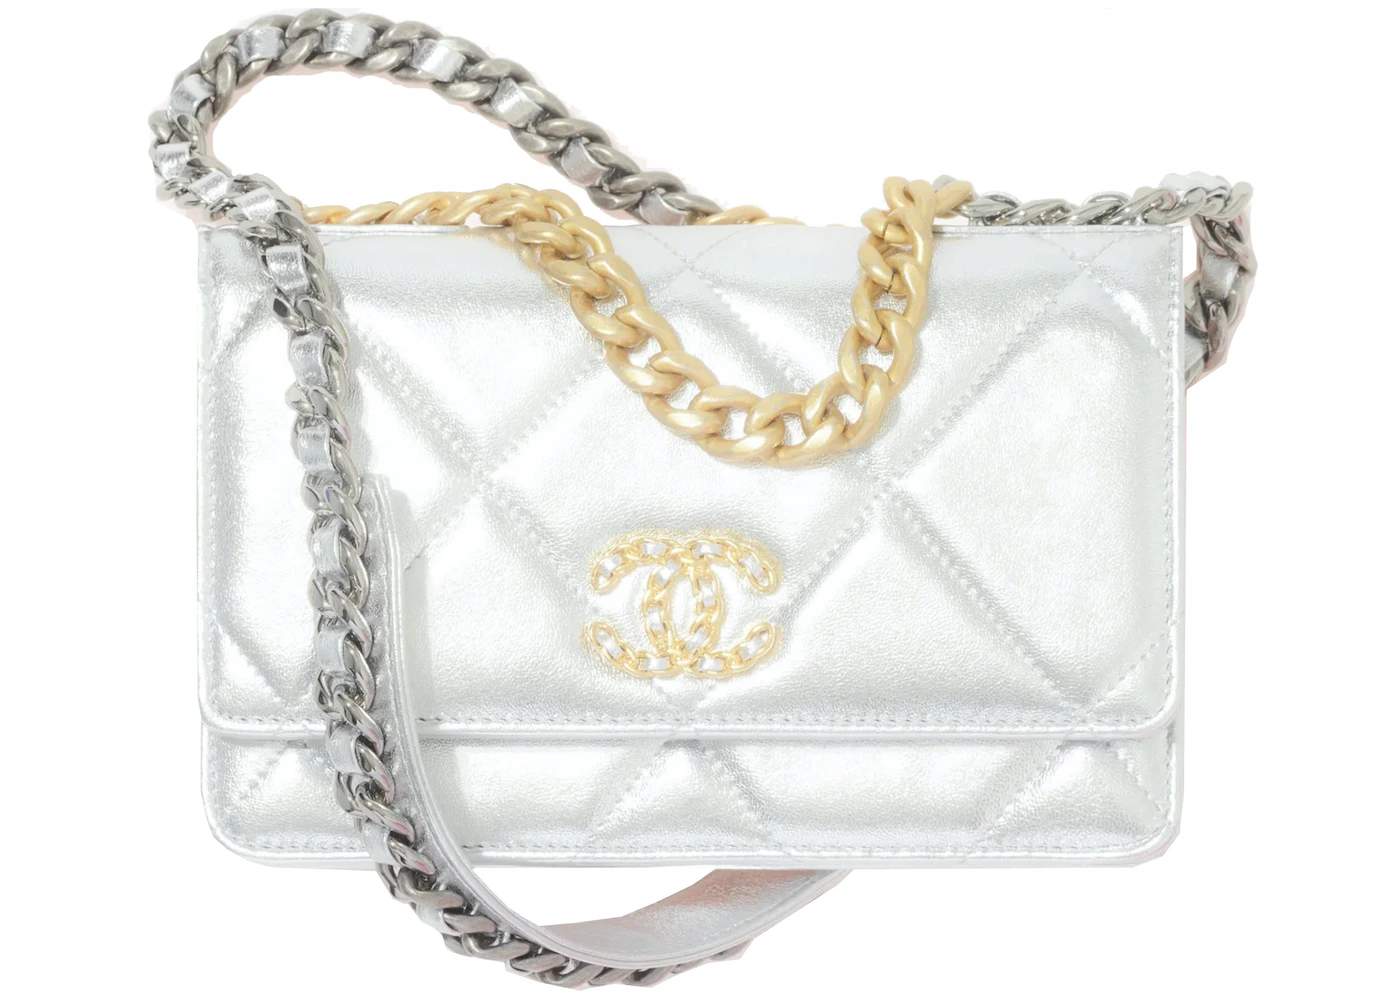 CHANEL Lambskin Quilted Chanel 19 Wallet On Chain WOC Beige